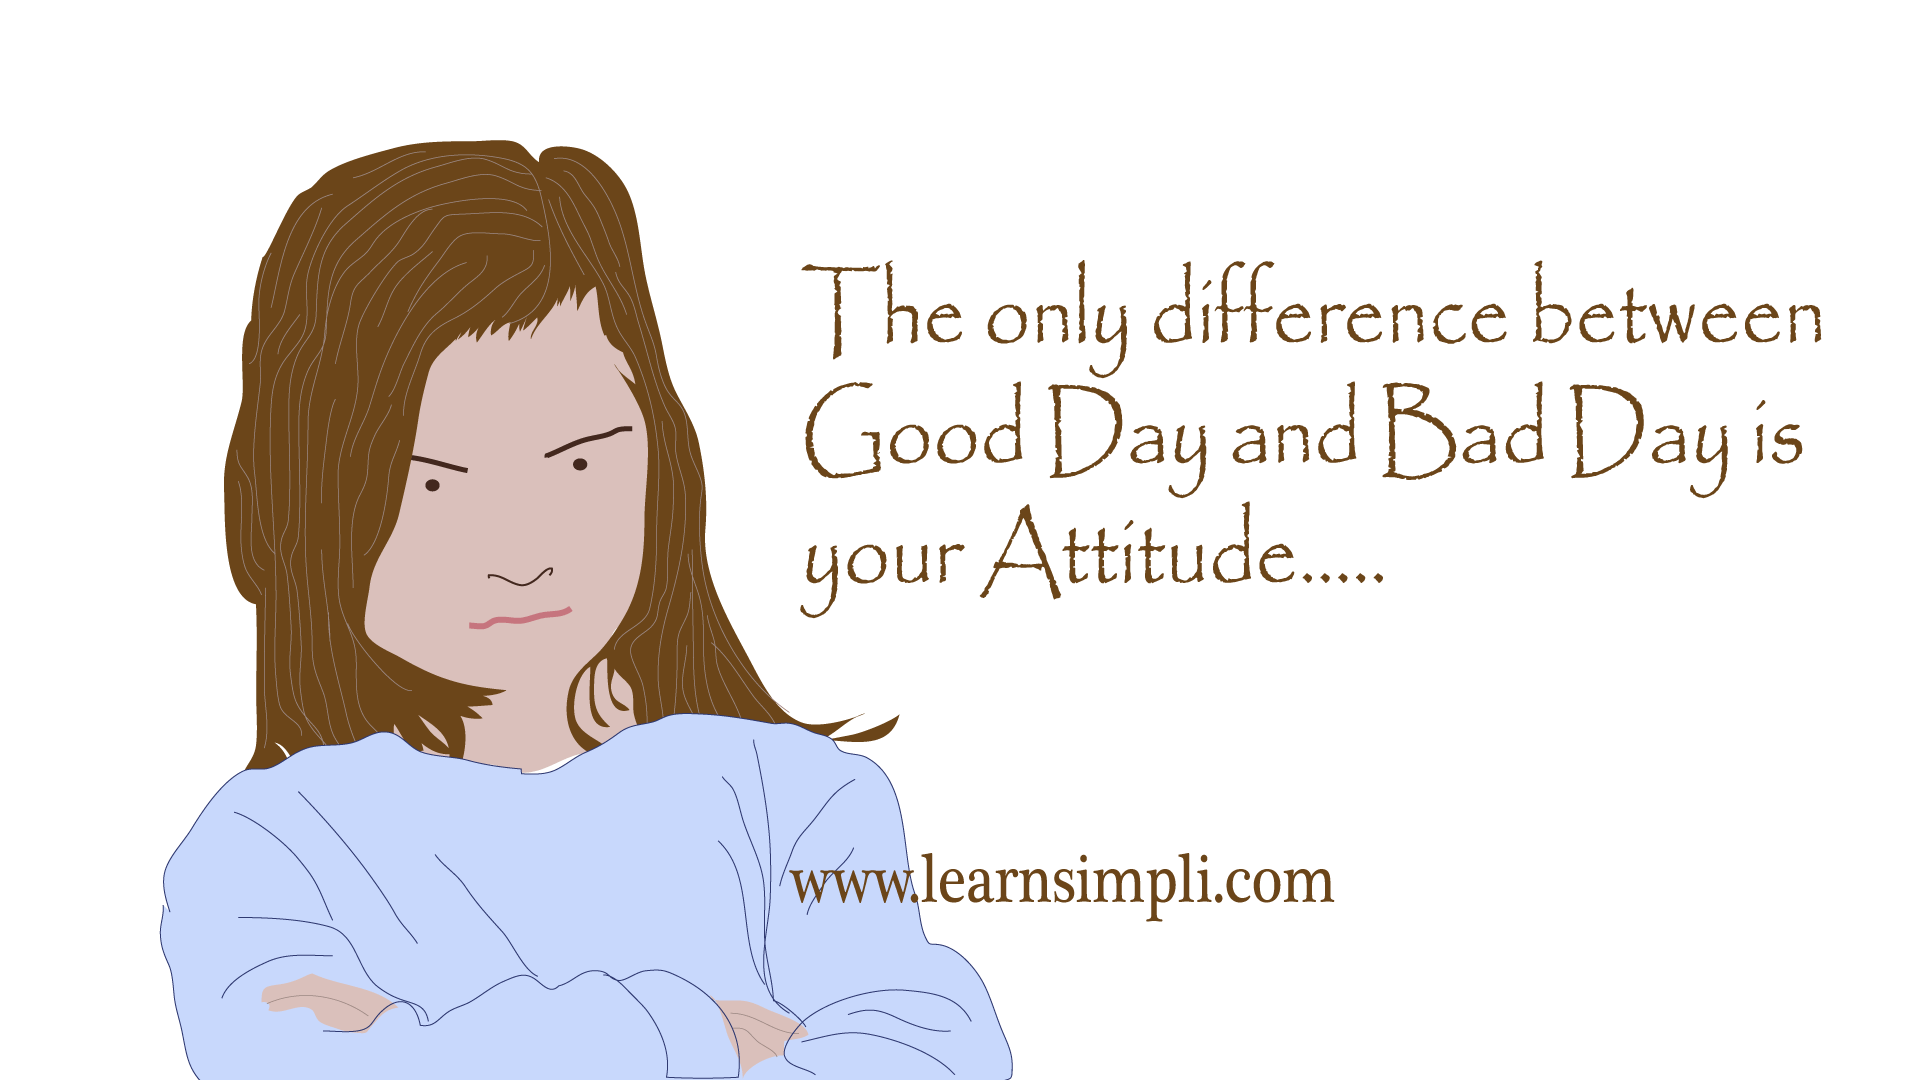 The only difference between good day and bad day is attitude